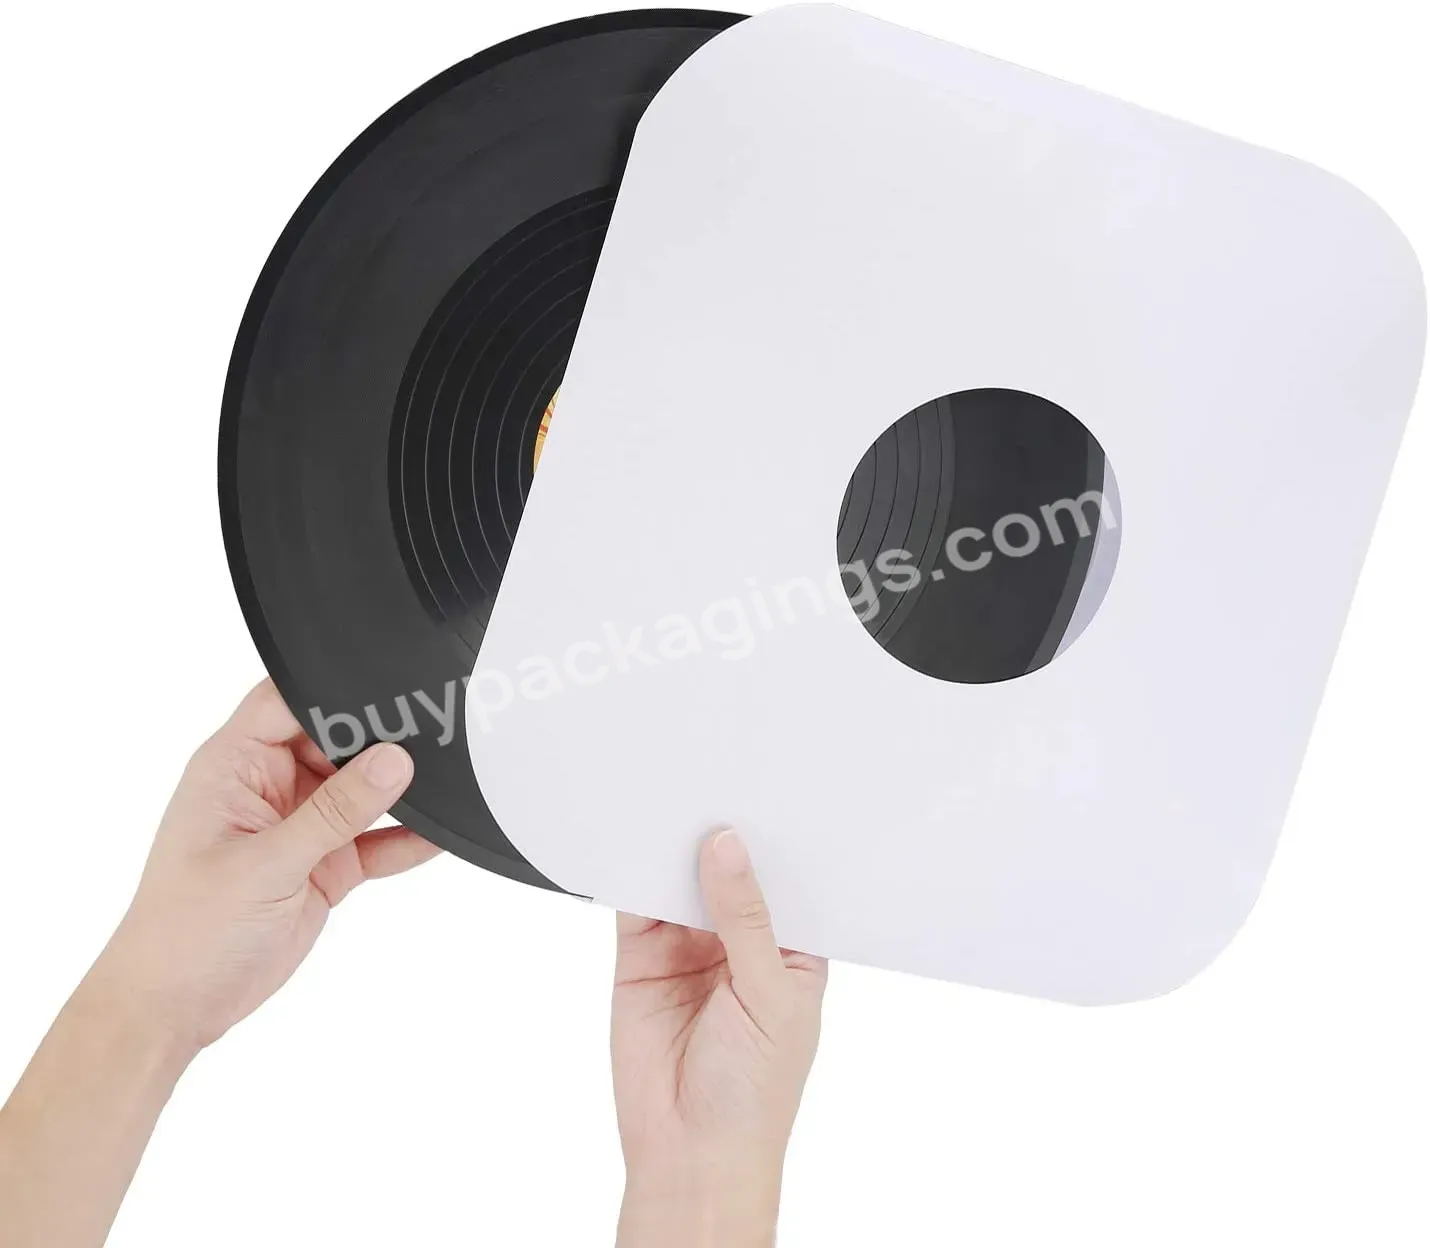 Heavyweight 12" Acid-free White Paper Lp Collection Inner Sleeves For Records Storage - Buy Lp Collection Inner Sleeves,White Paper Inner Sleeves For Records Storage,Acid-free White Paper Lp Records Sleeves.